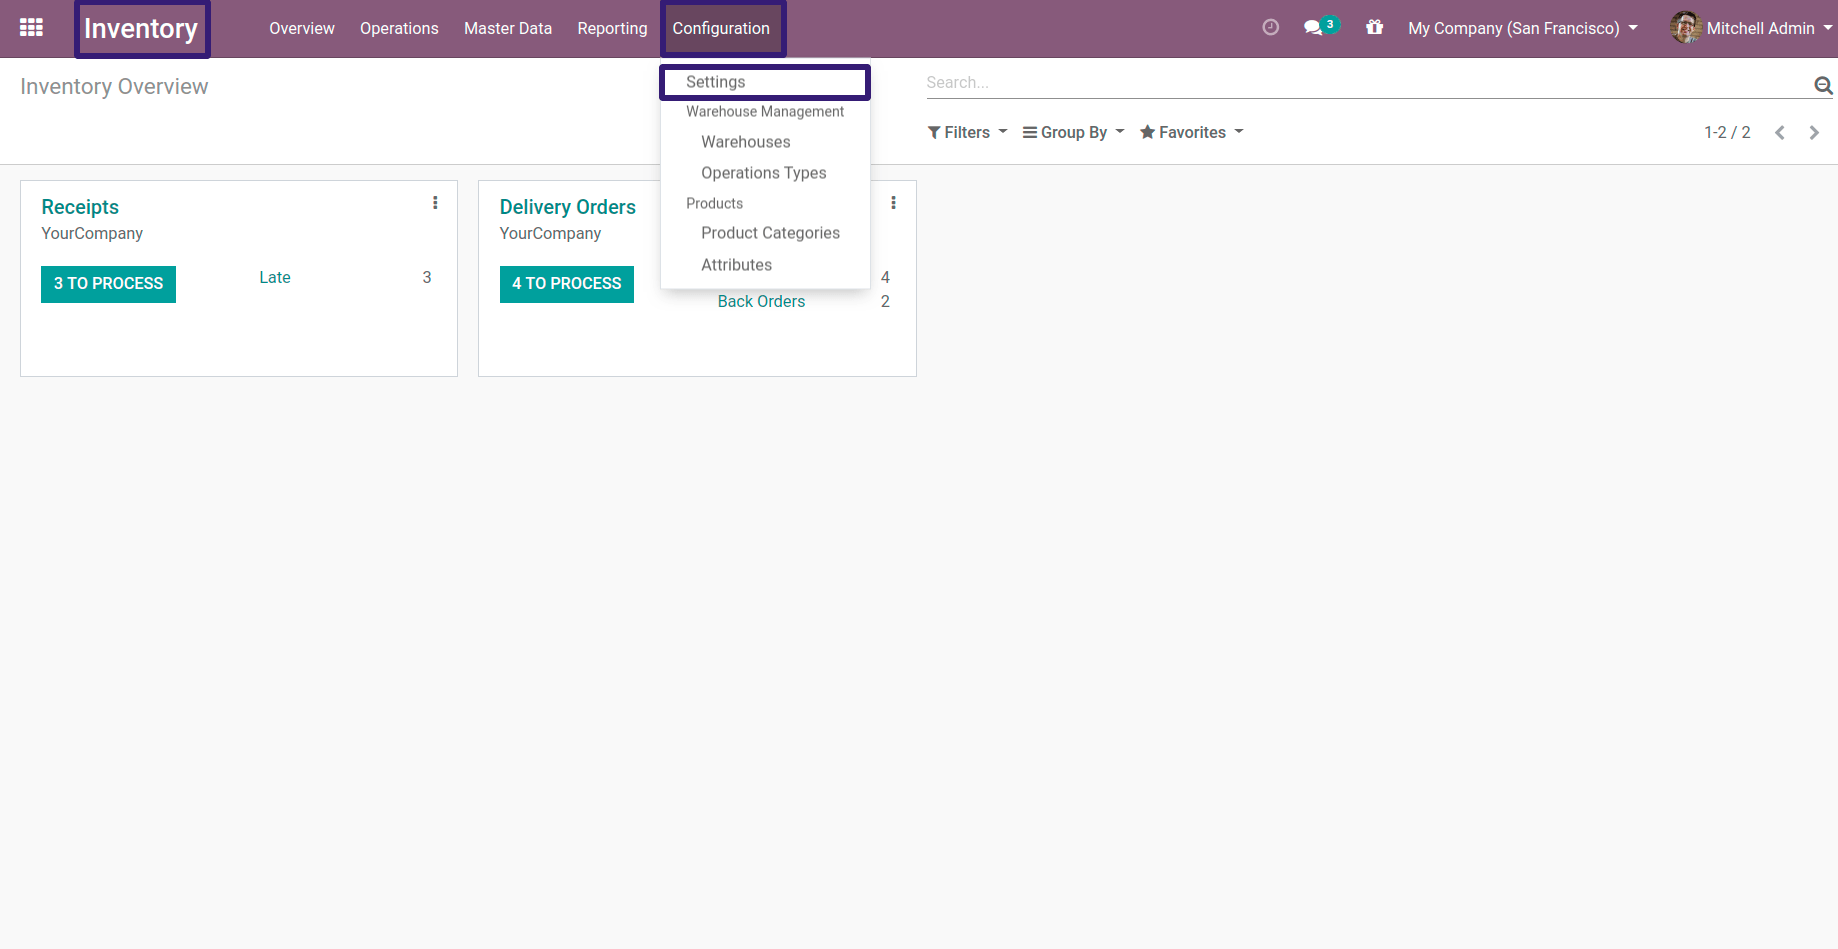 Landed Cost In Odoo 13